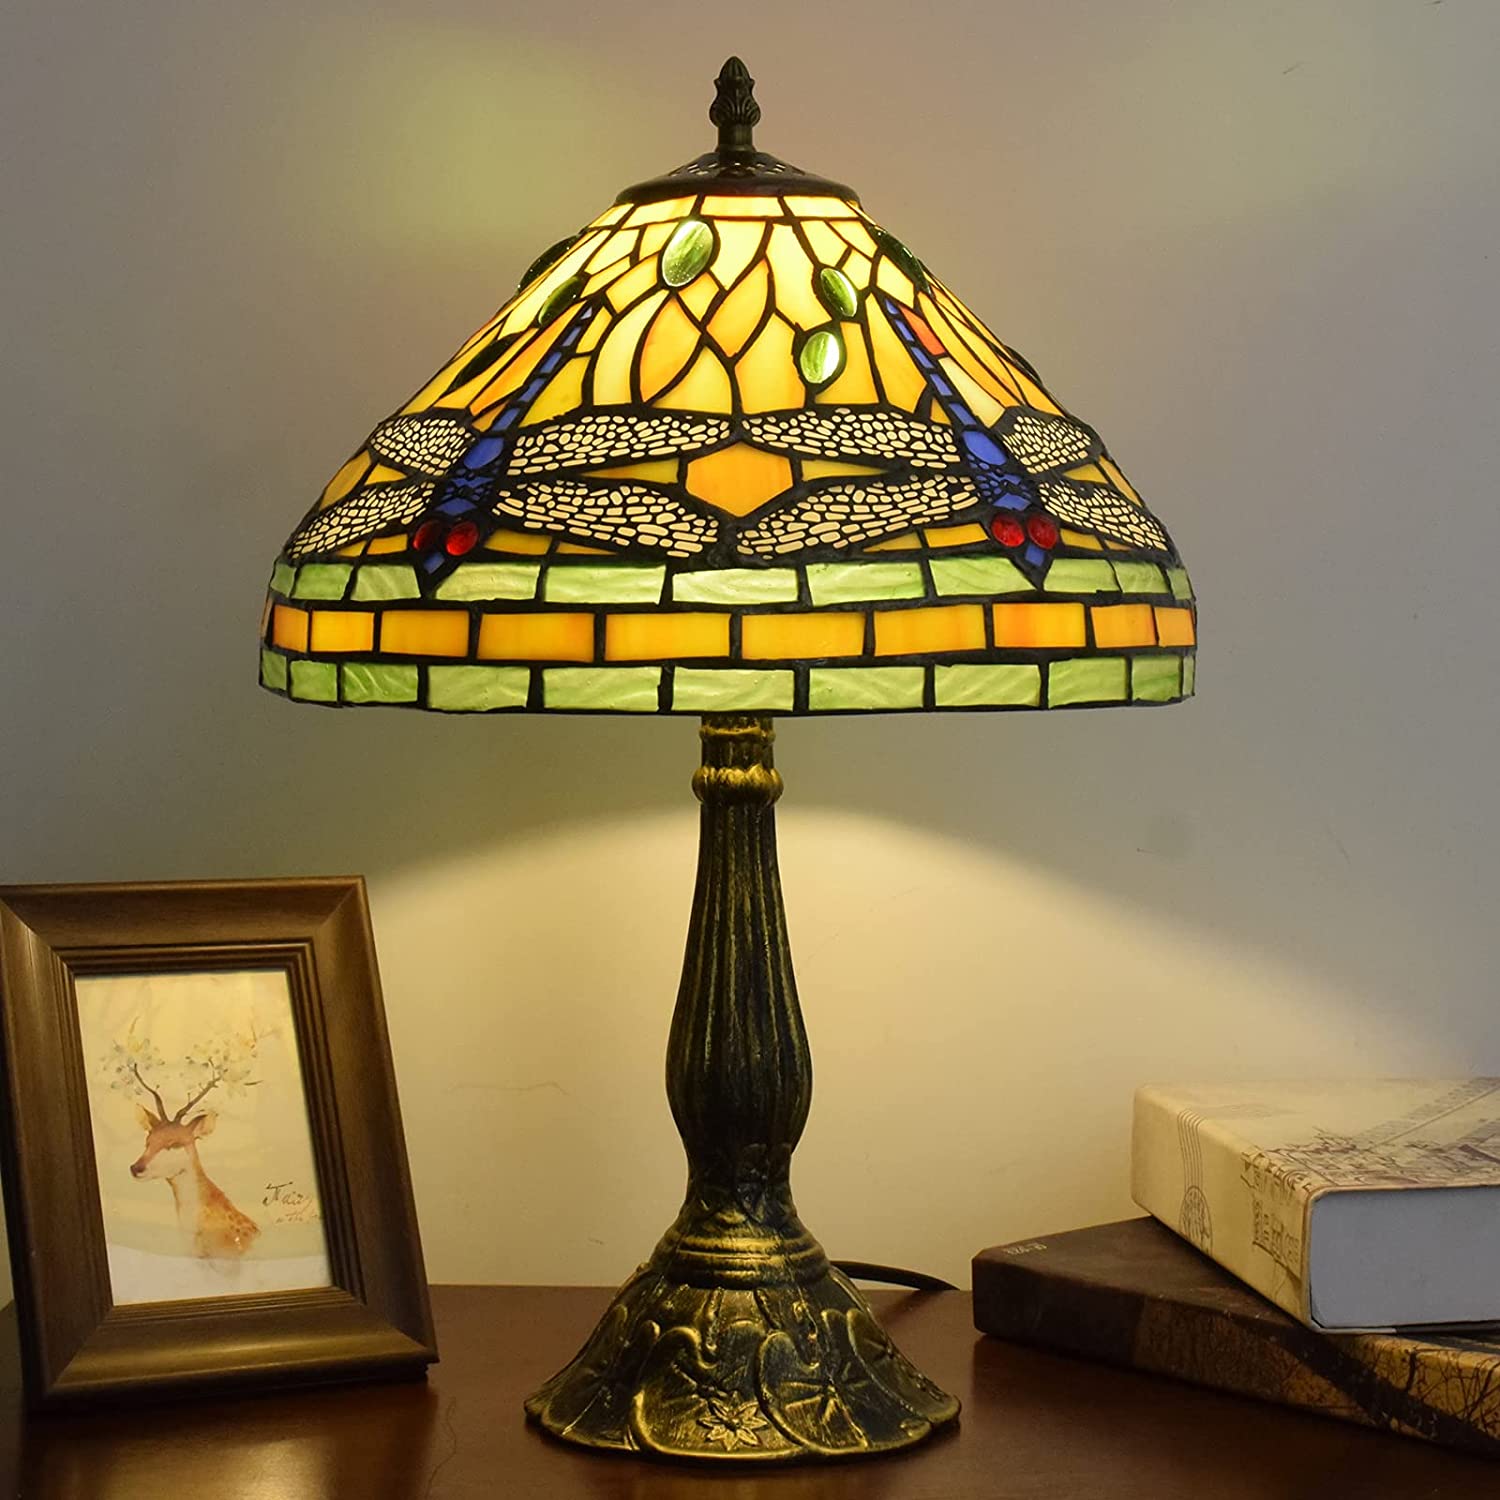 SHADY  Lamp Stained Glass Lamp Dragonfly Yellow Bedroom Table Lamp Reading Desk Light for Bedside Living Room Office Dormitory Dining Room Decorate  12x12x18 Include Light Bulb